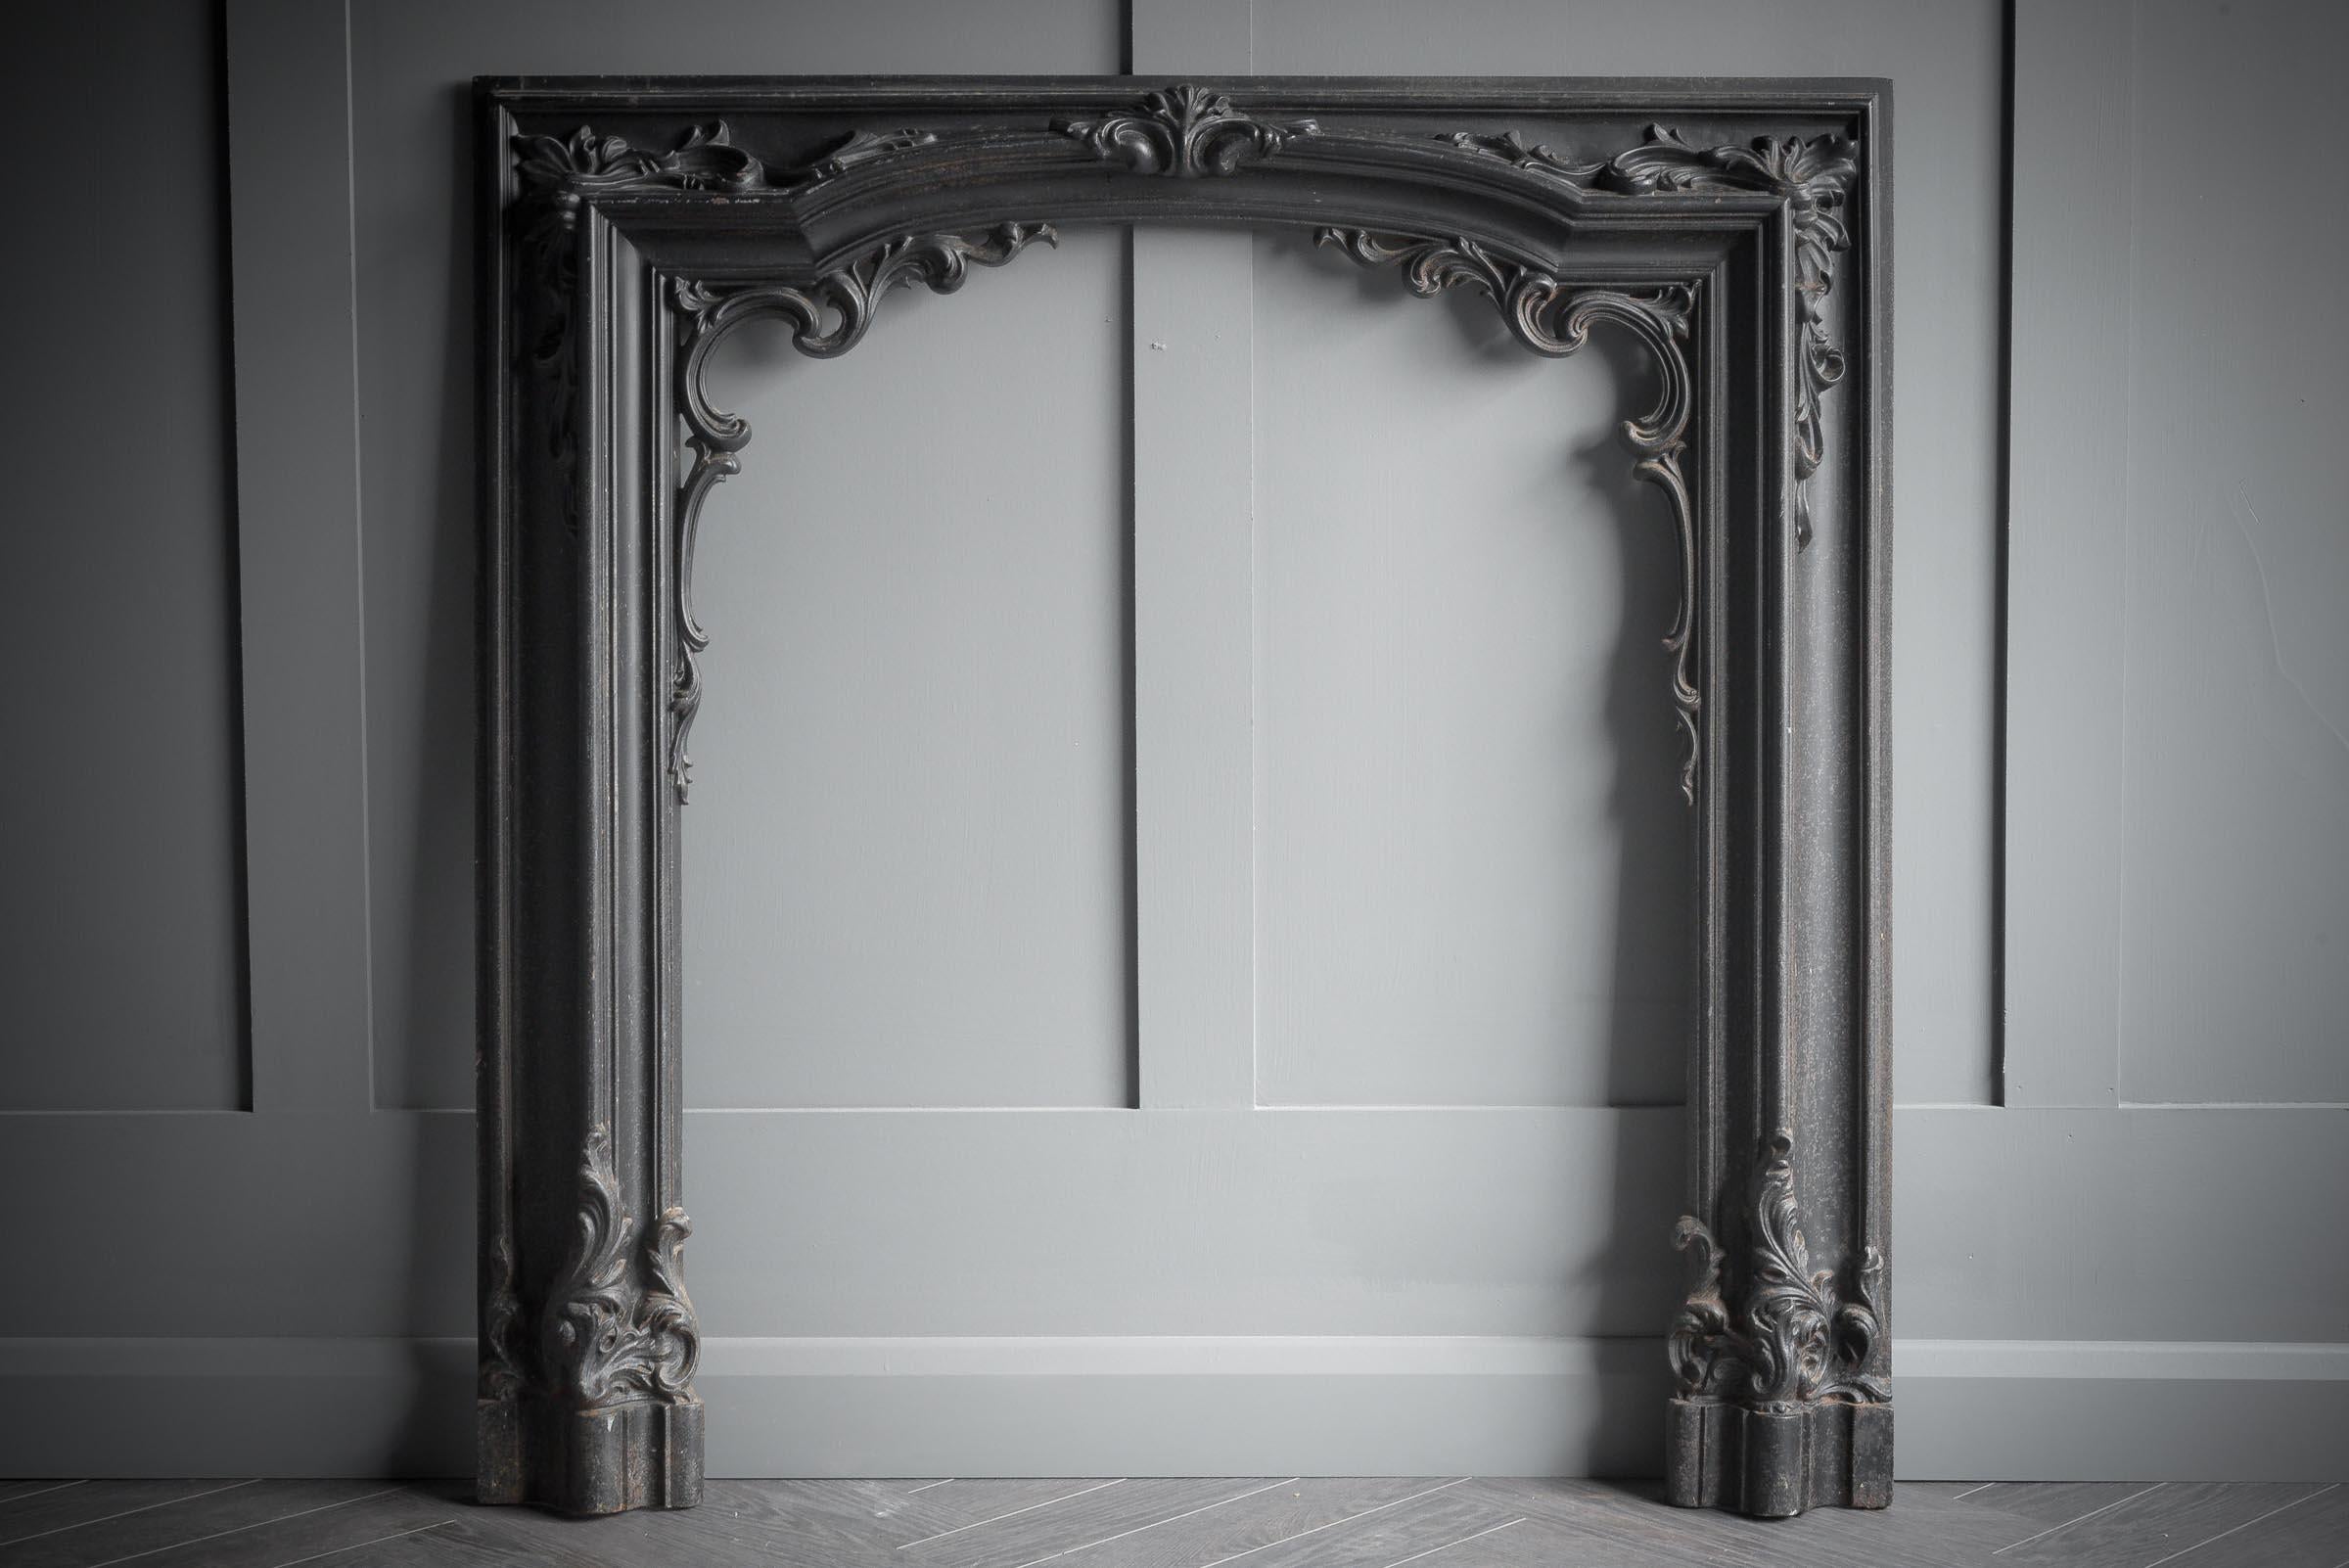 Antique reclaimed Edwardian Art nouveau cast iron fire surround, with floral detailing at the top of the arch. The matt black finish is original and would add an elegant focus to any fireplace.